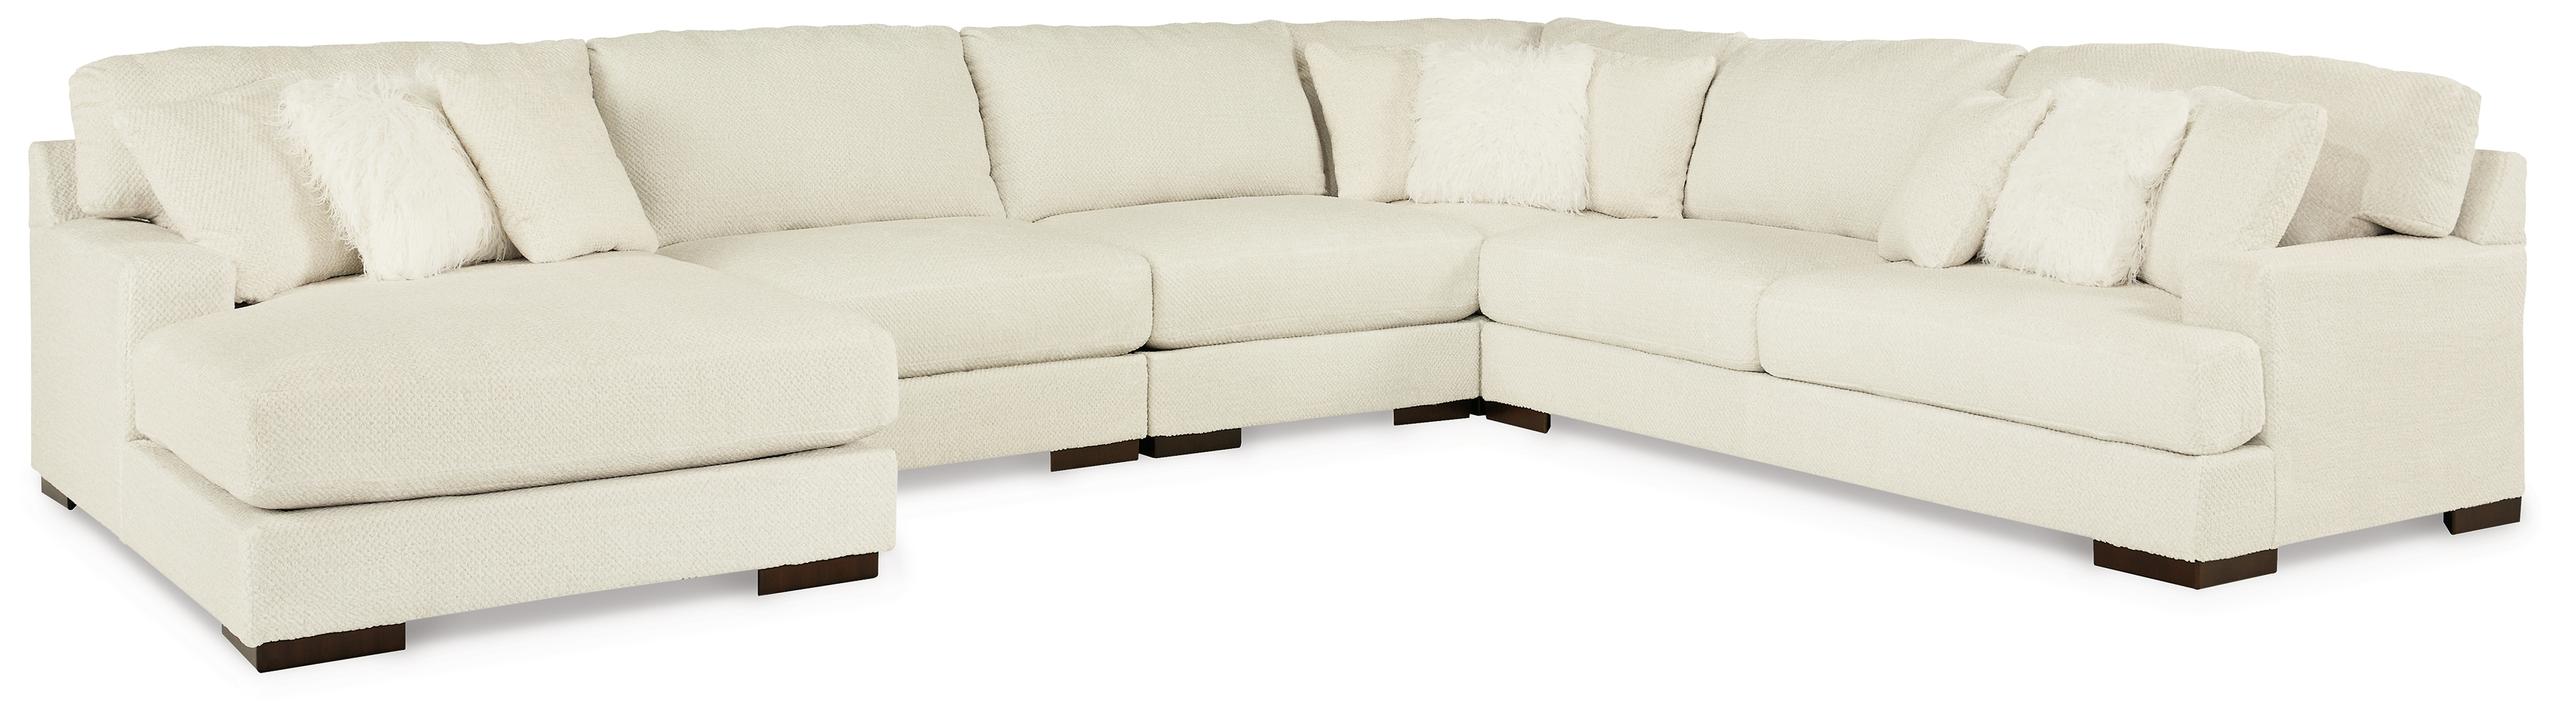 ASHLEY FURNITURE 52204S9 Zada 5-piece Sectional With Chaise